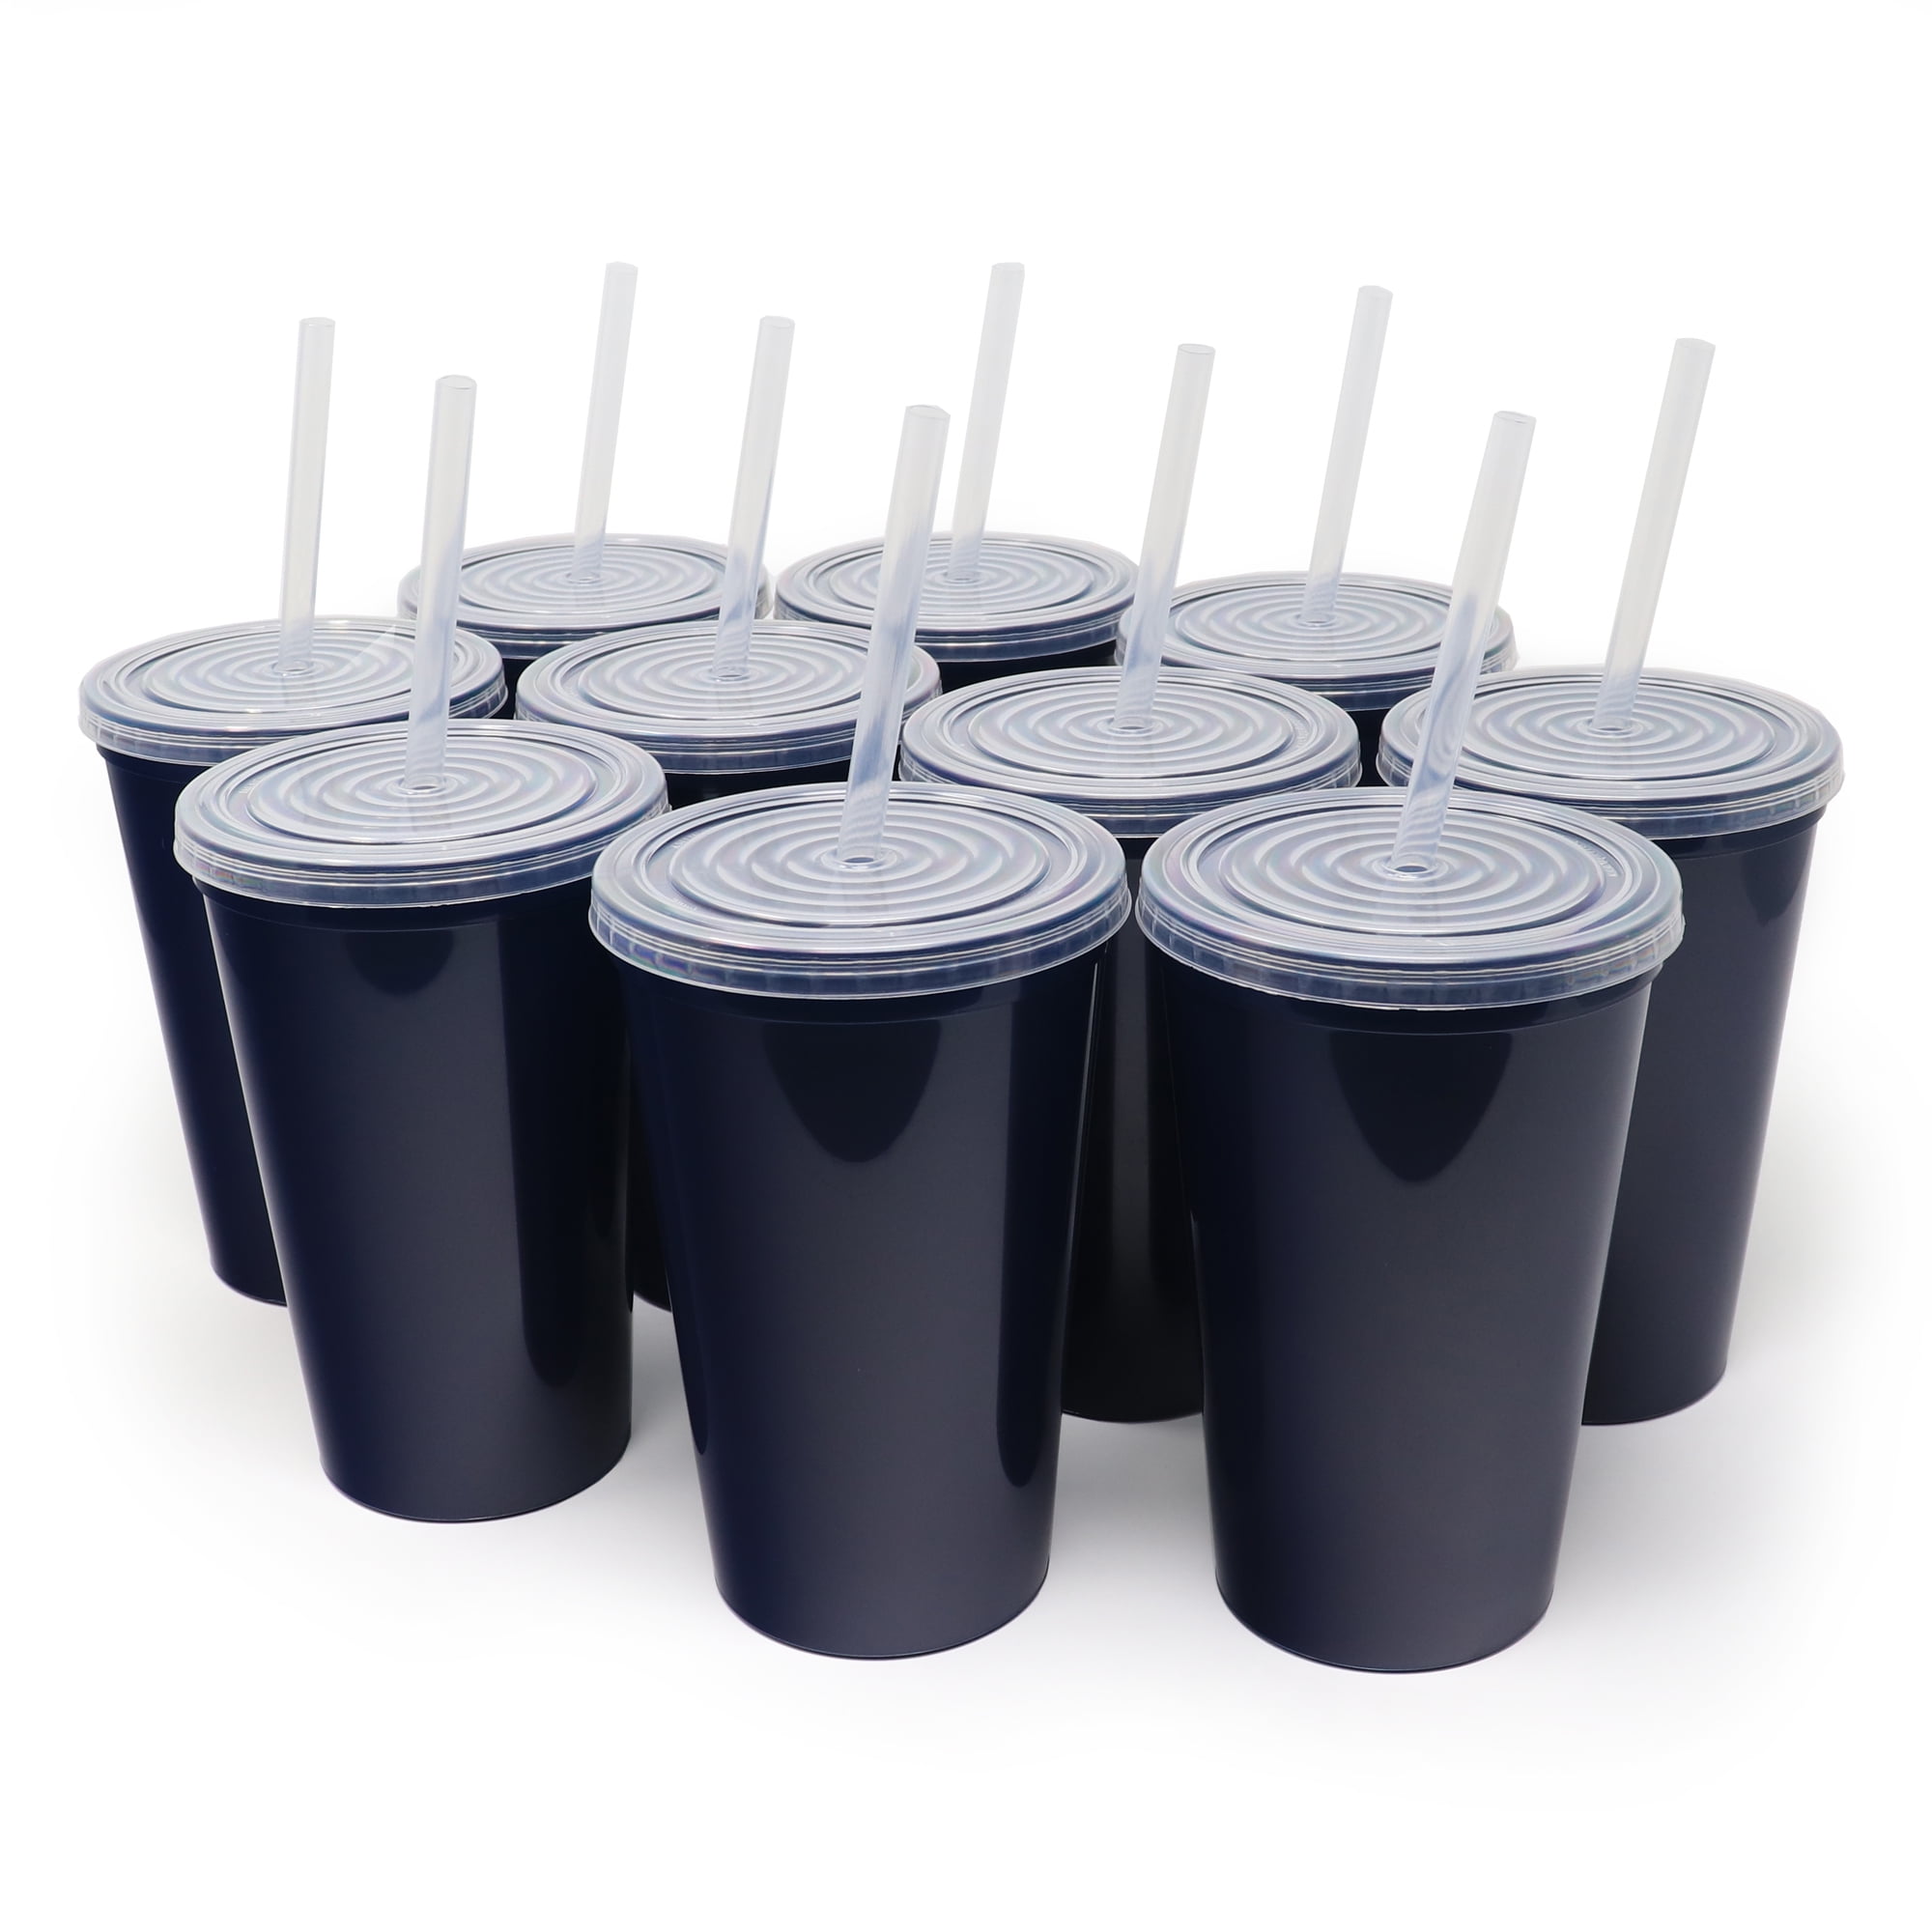 Rolling Sands 22 oz Reusable Plastic Cups with Lids, 10 Pack, USA Made Black Tumblers; Includes 10 Reusable Straws; Dishwasher Safe